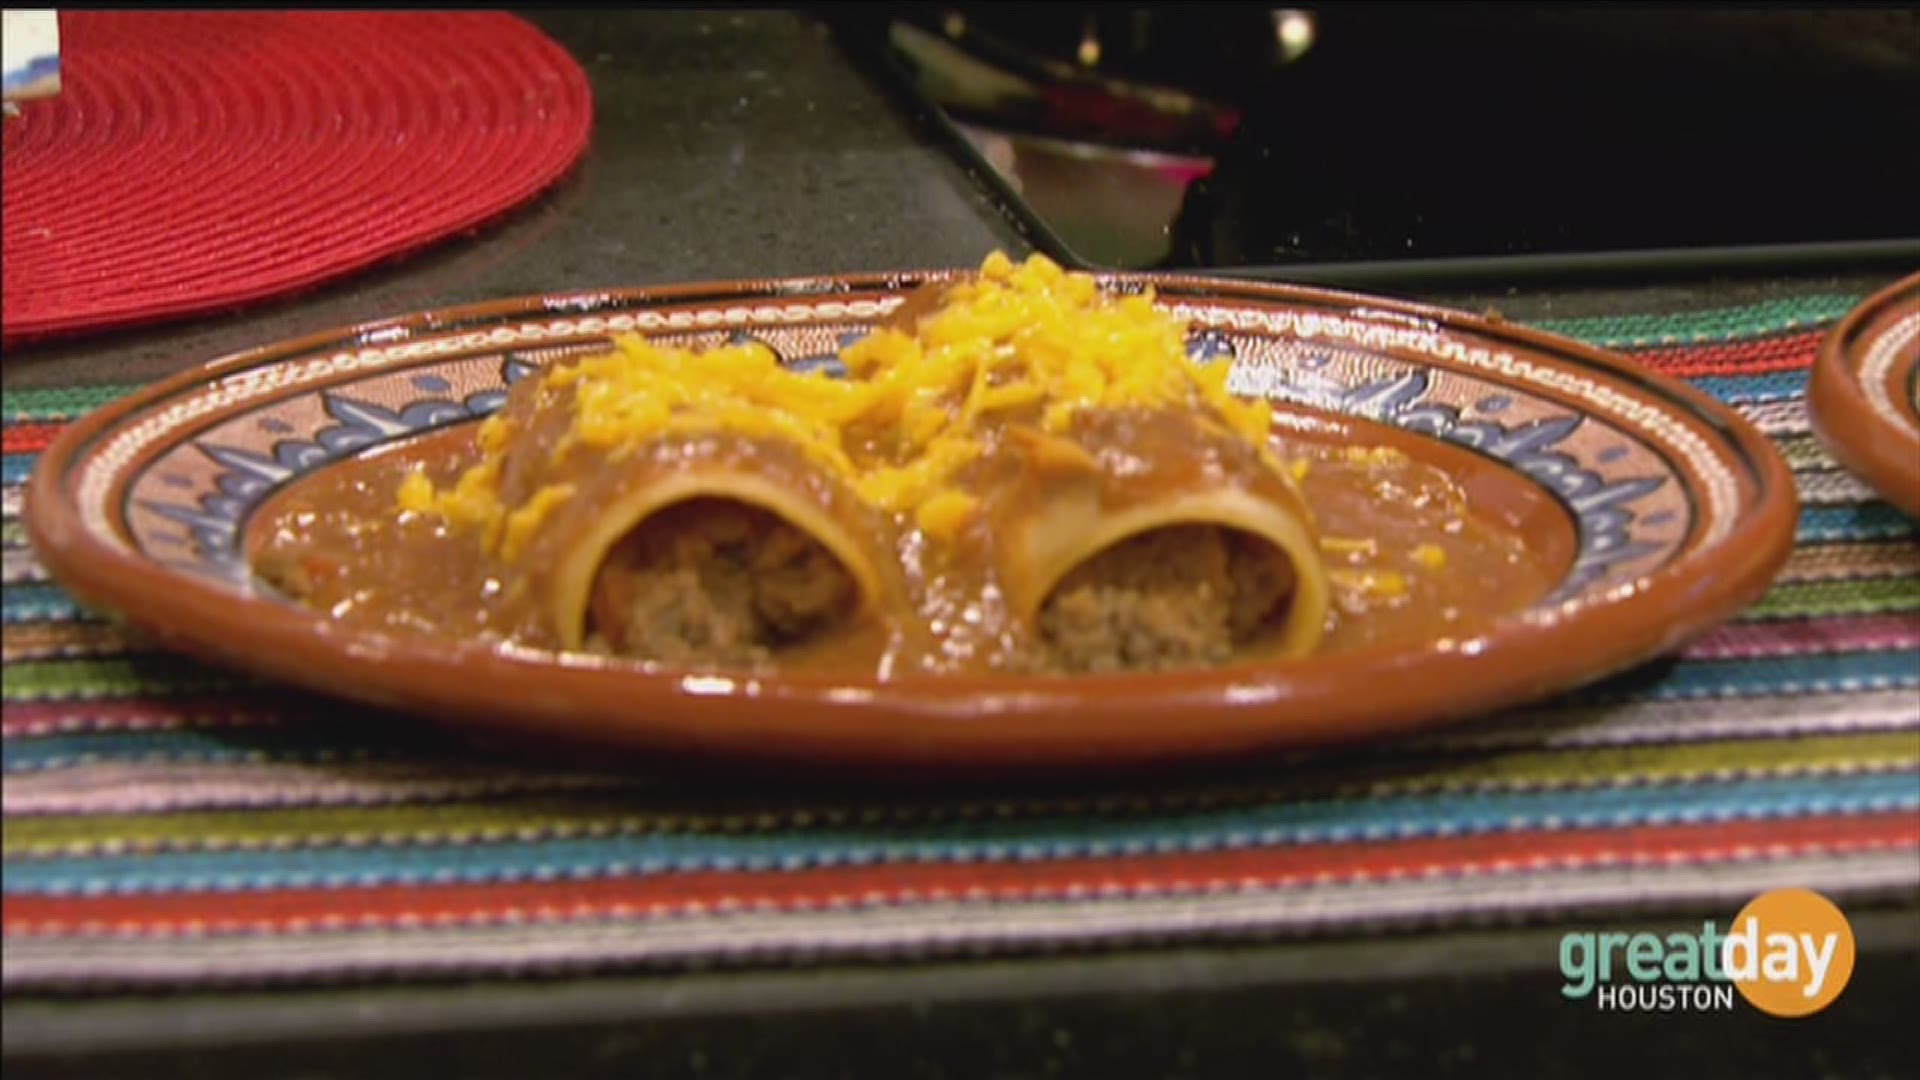 Sylvia of Sylvia's Enchilada Kitchen stops by great day to roll up some one-of-a-kind enchiladas. Don't you miss smell-o-vision right now?